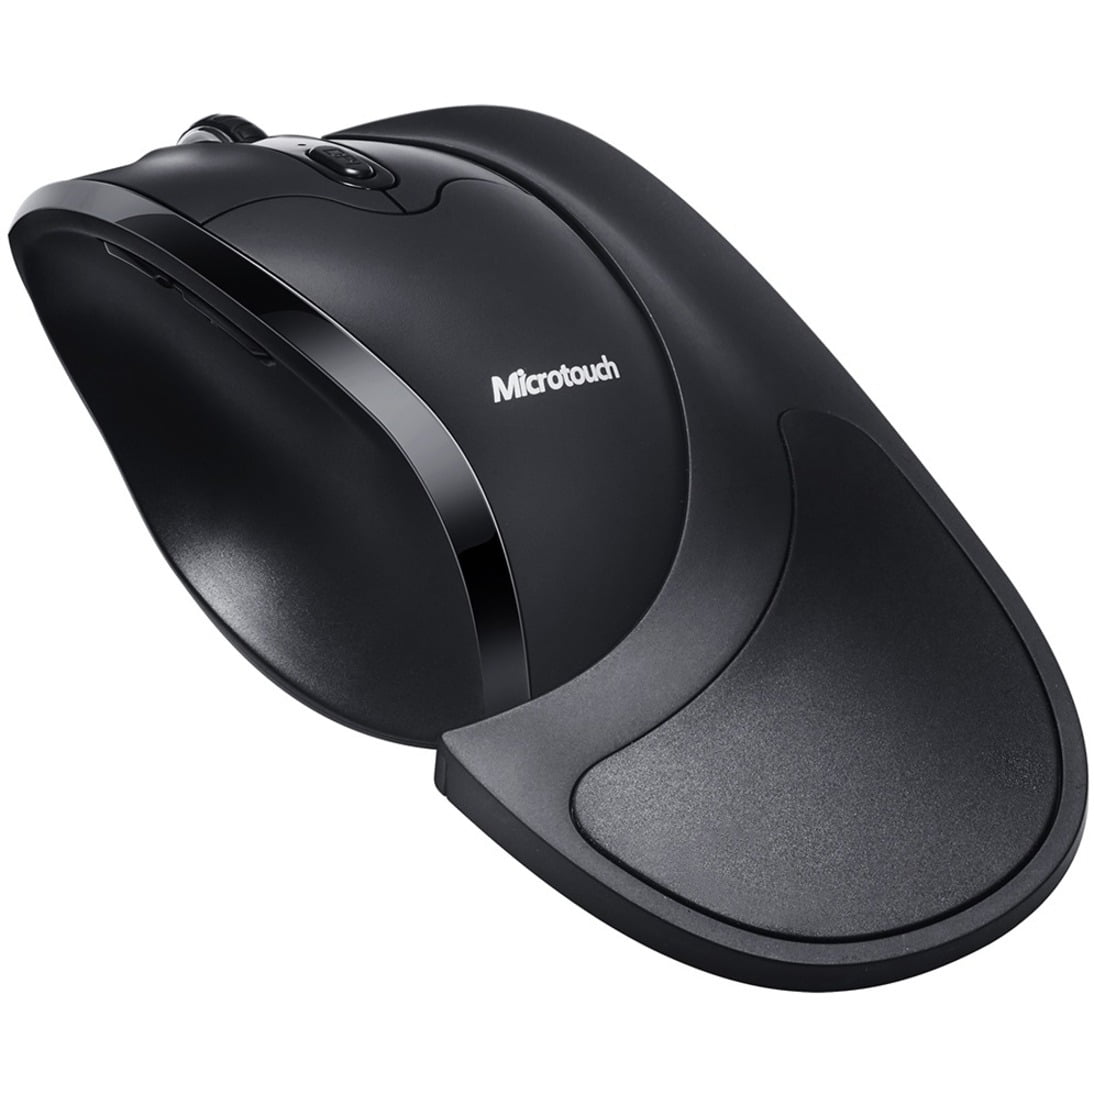 Goldtouch Newtral 3 Mouse Medium, Black